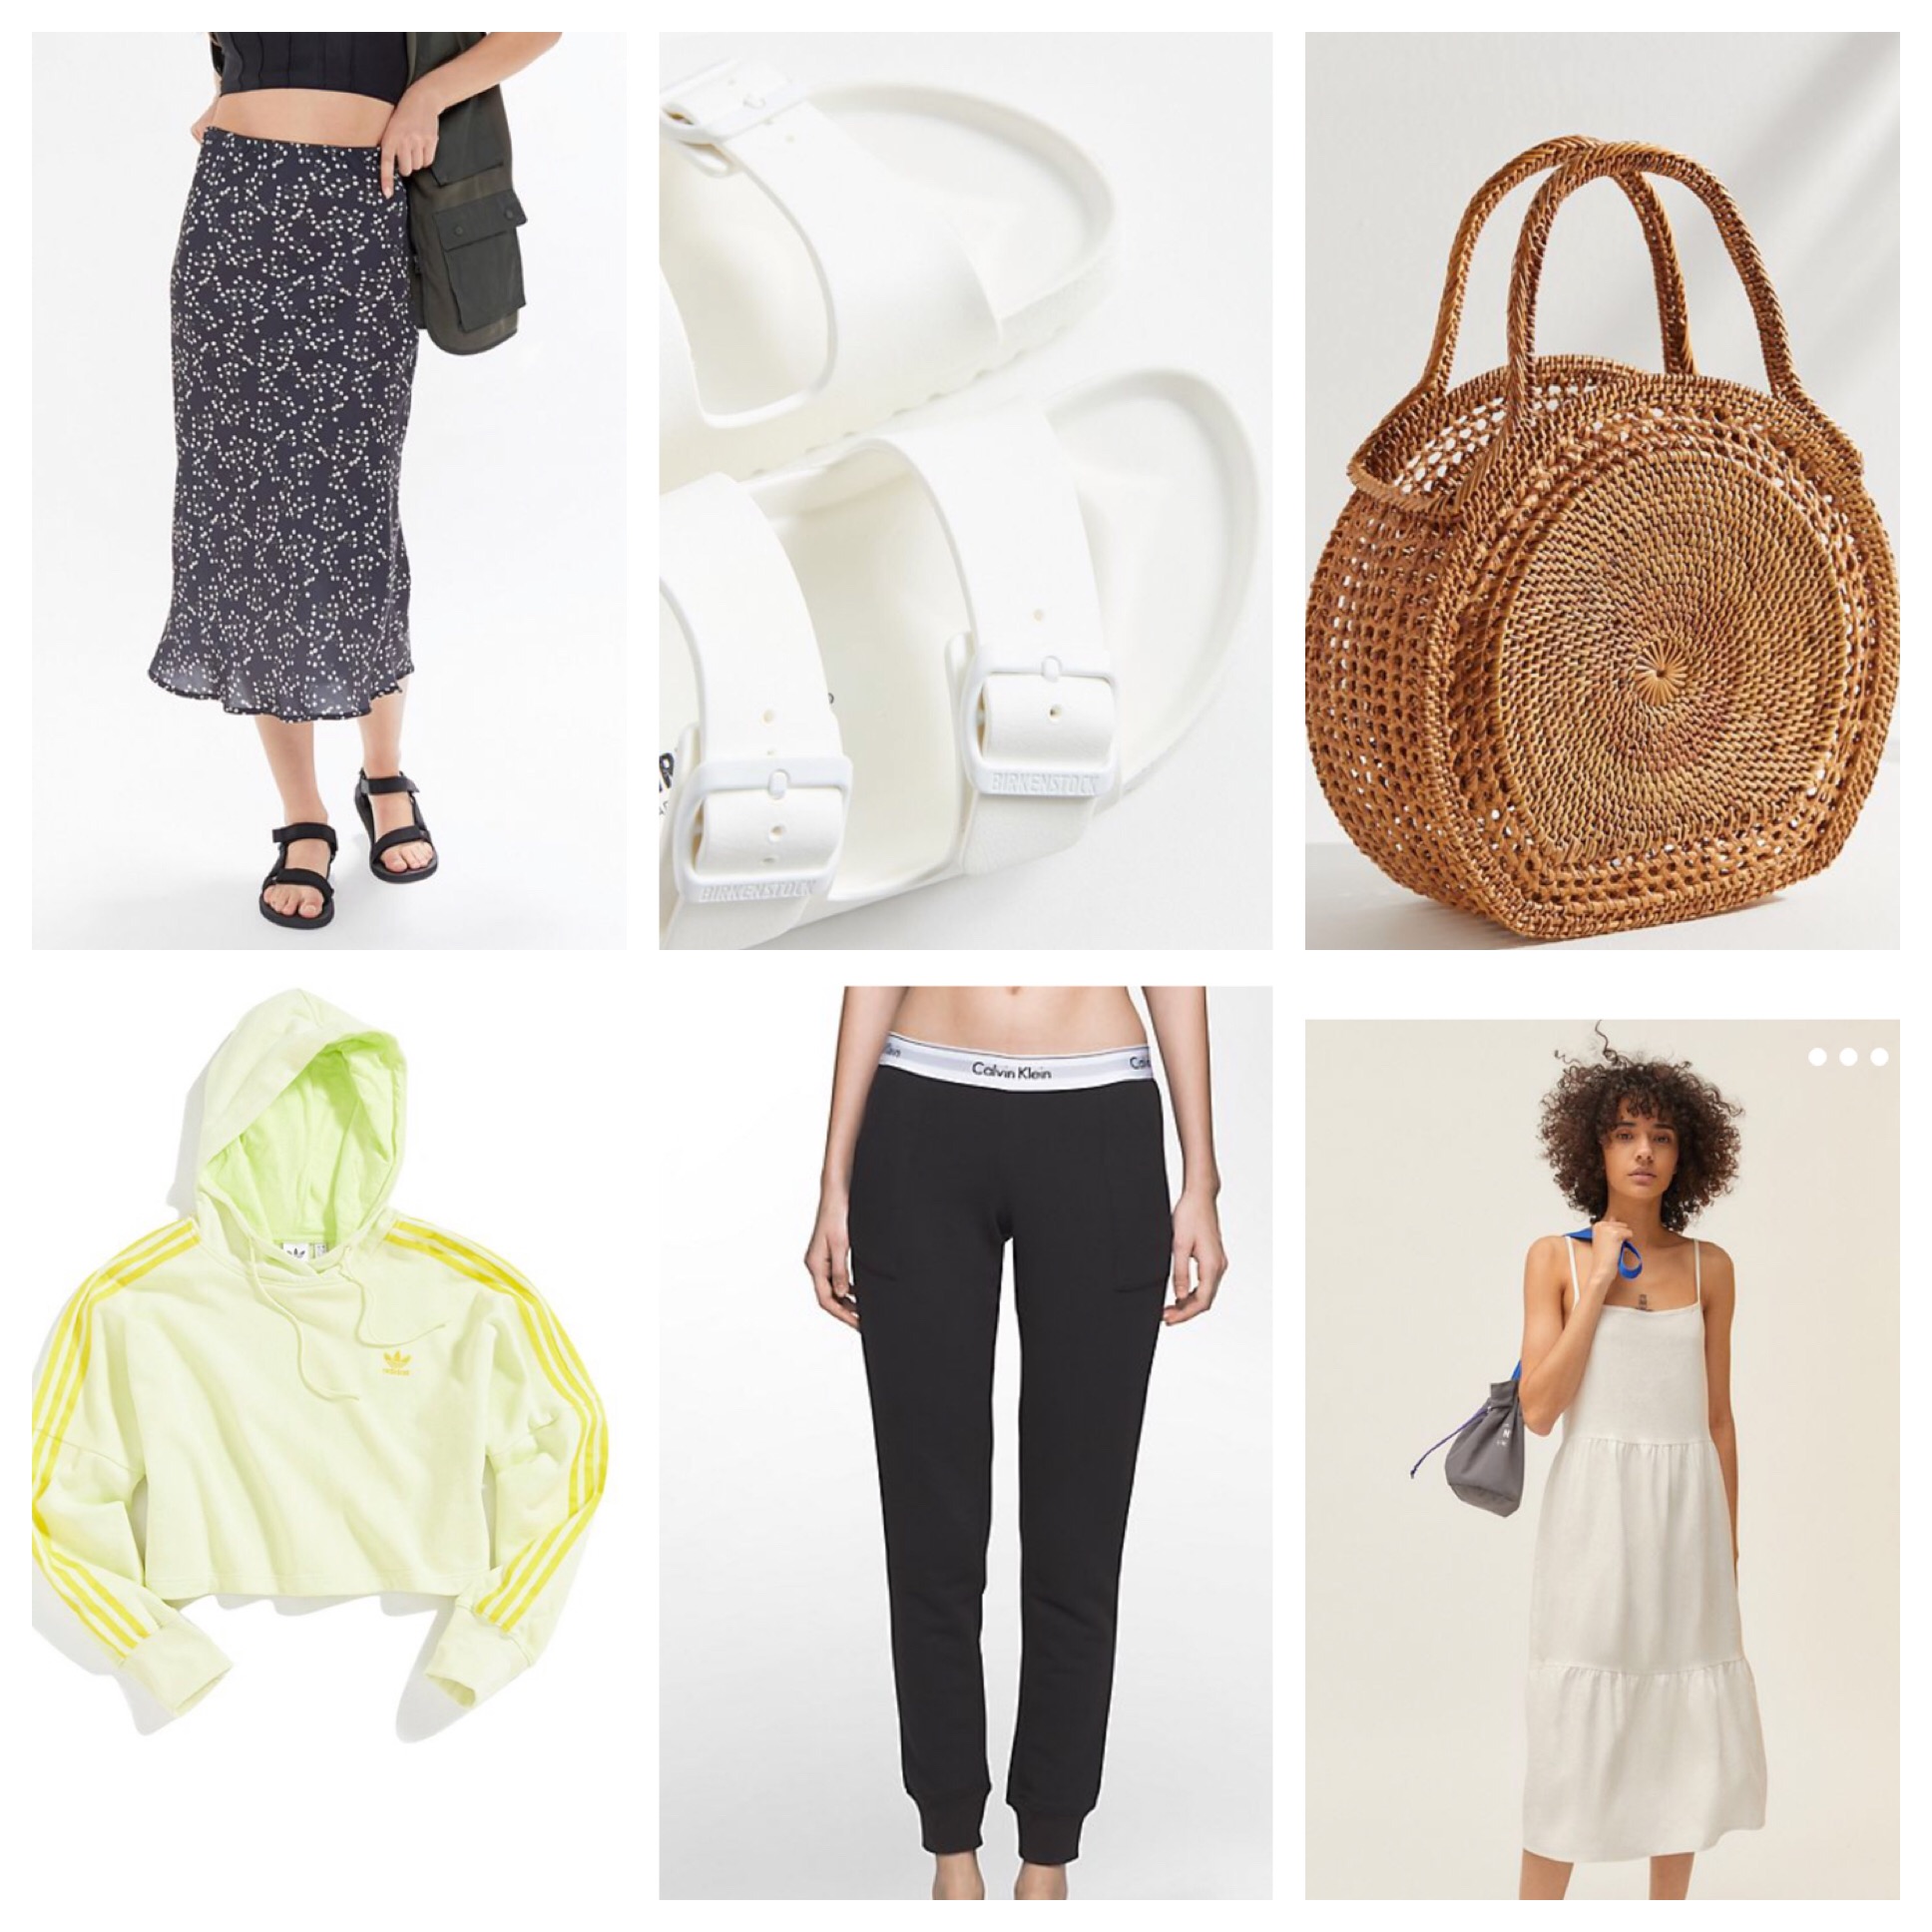 LTK Day Shopping Guide: The Best Sales and Top Picks featured by top US fashion blog, Outfits & Outings: best deals on Urban Outfitters